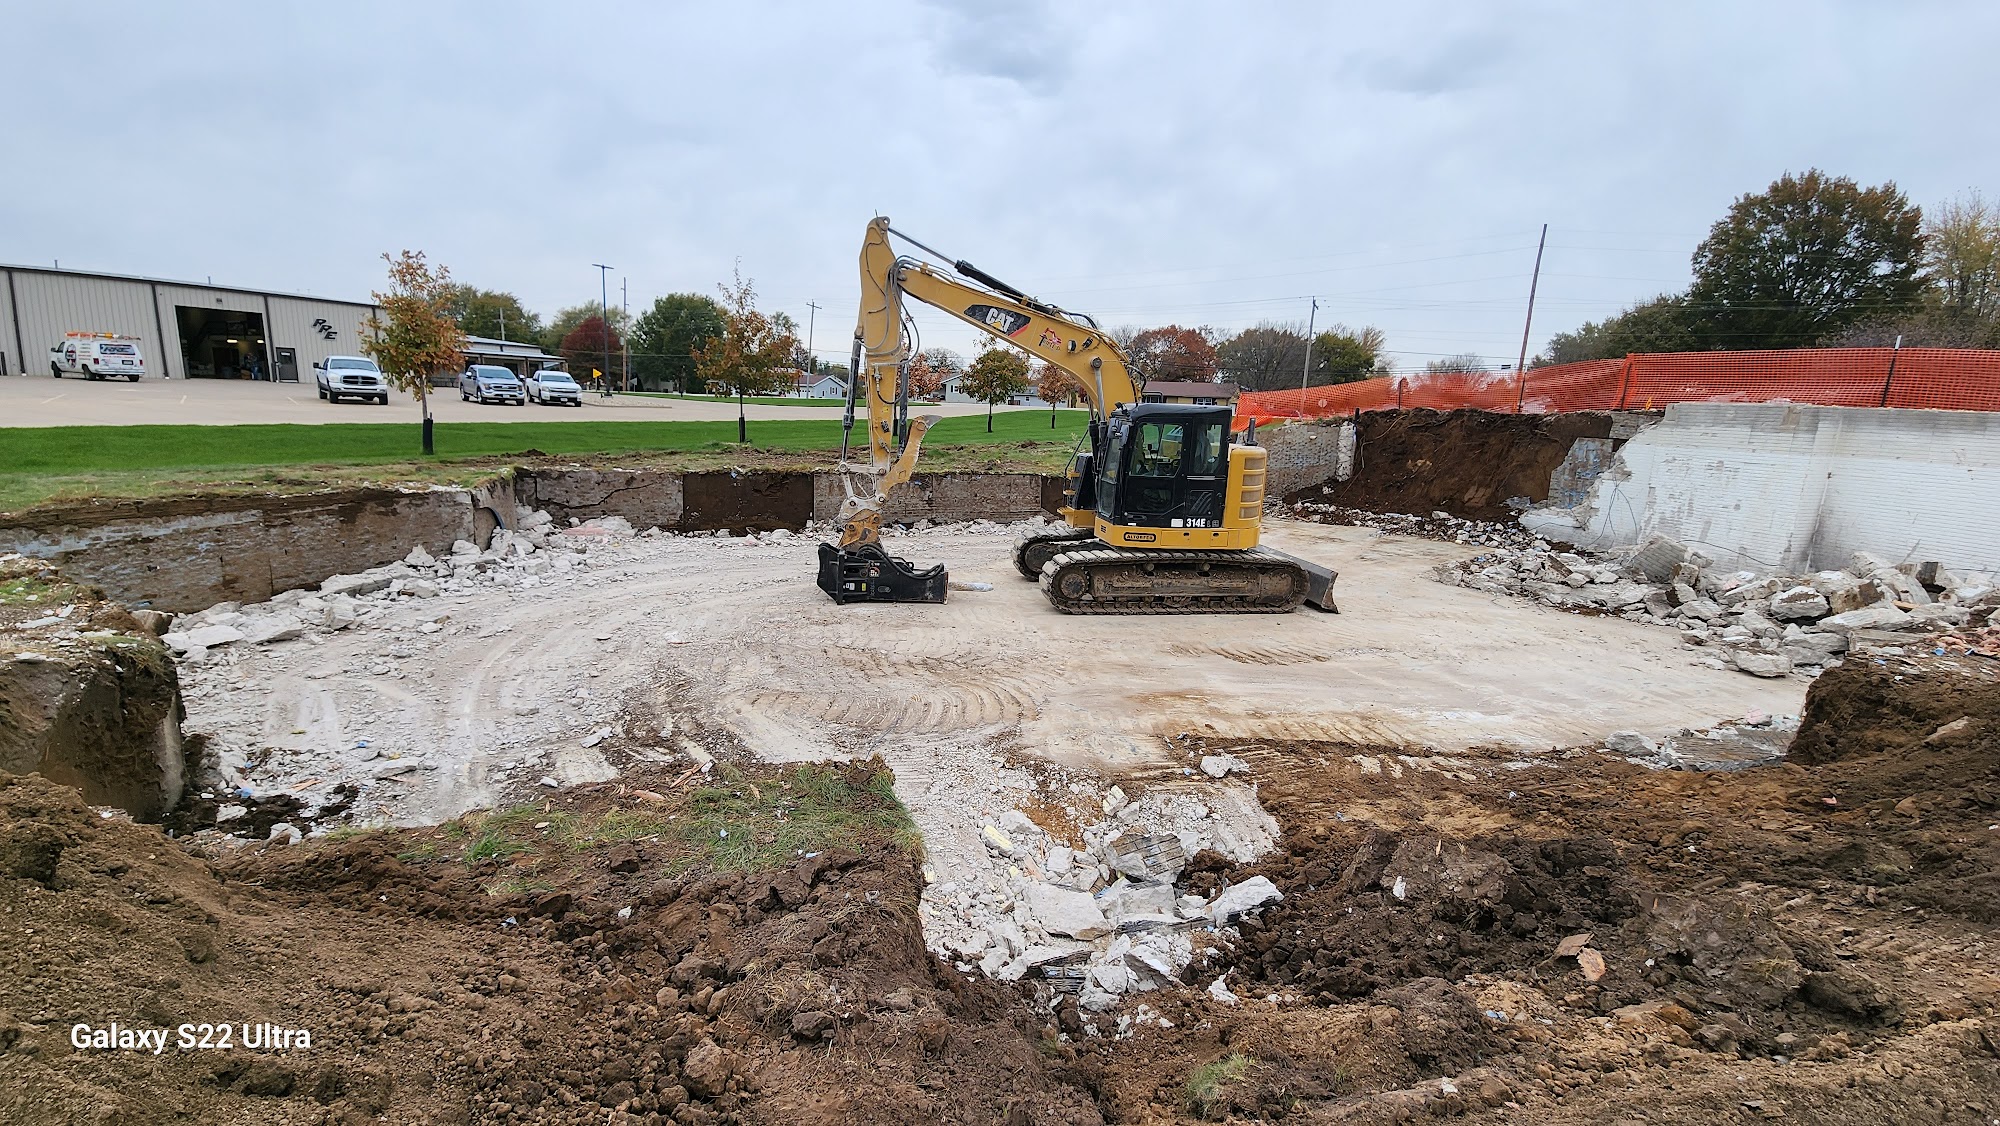 Triple D Excavating Co. 3359 N 1300th Ave, Orion Illinois 61273